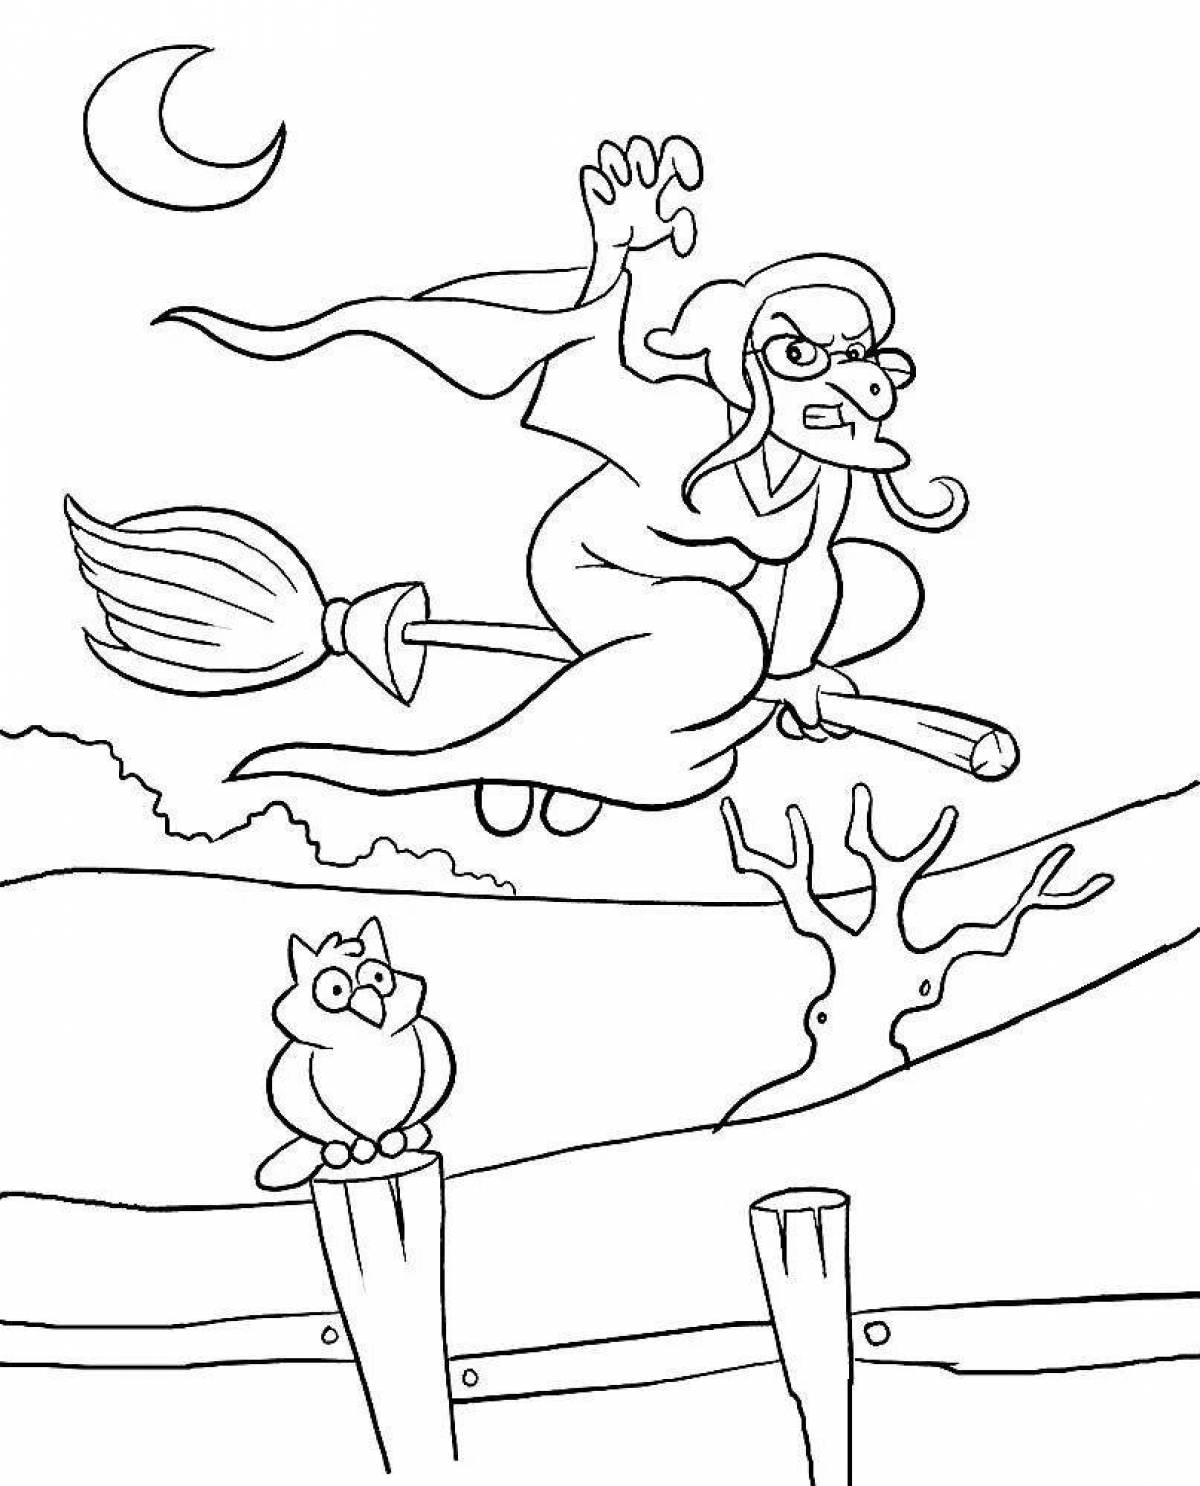 Christmas eve animated coloring page